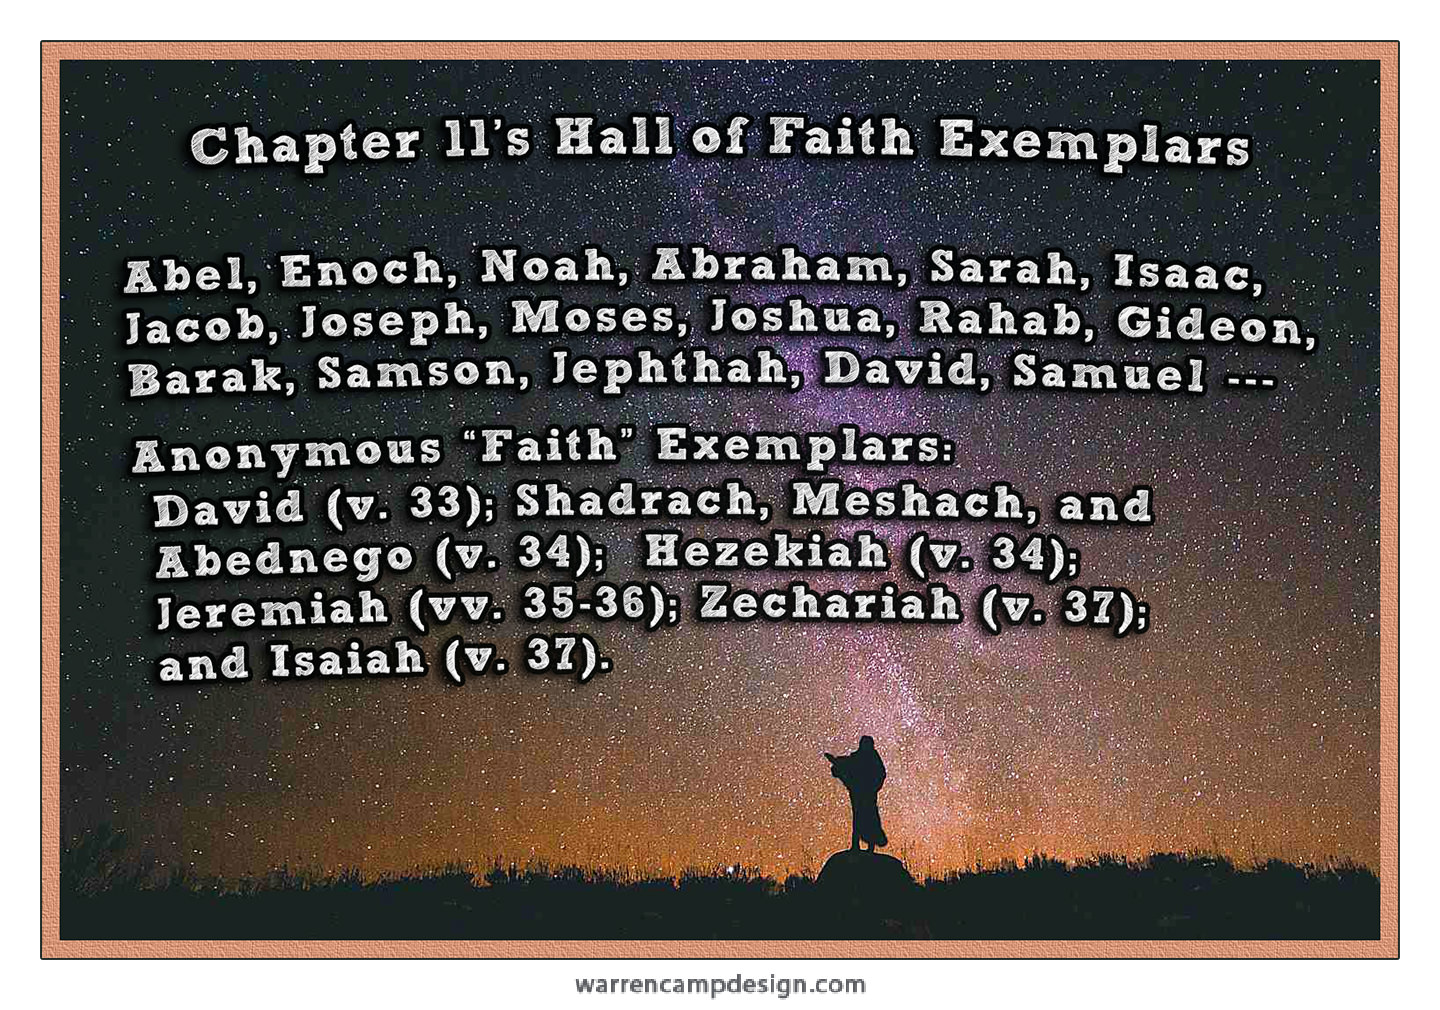 Scripture picture of Hall of Faith inductees in 'Hebrews'